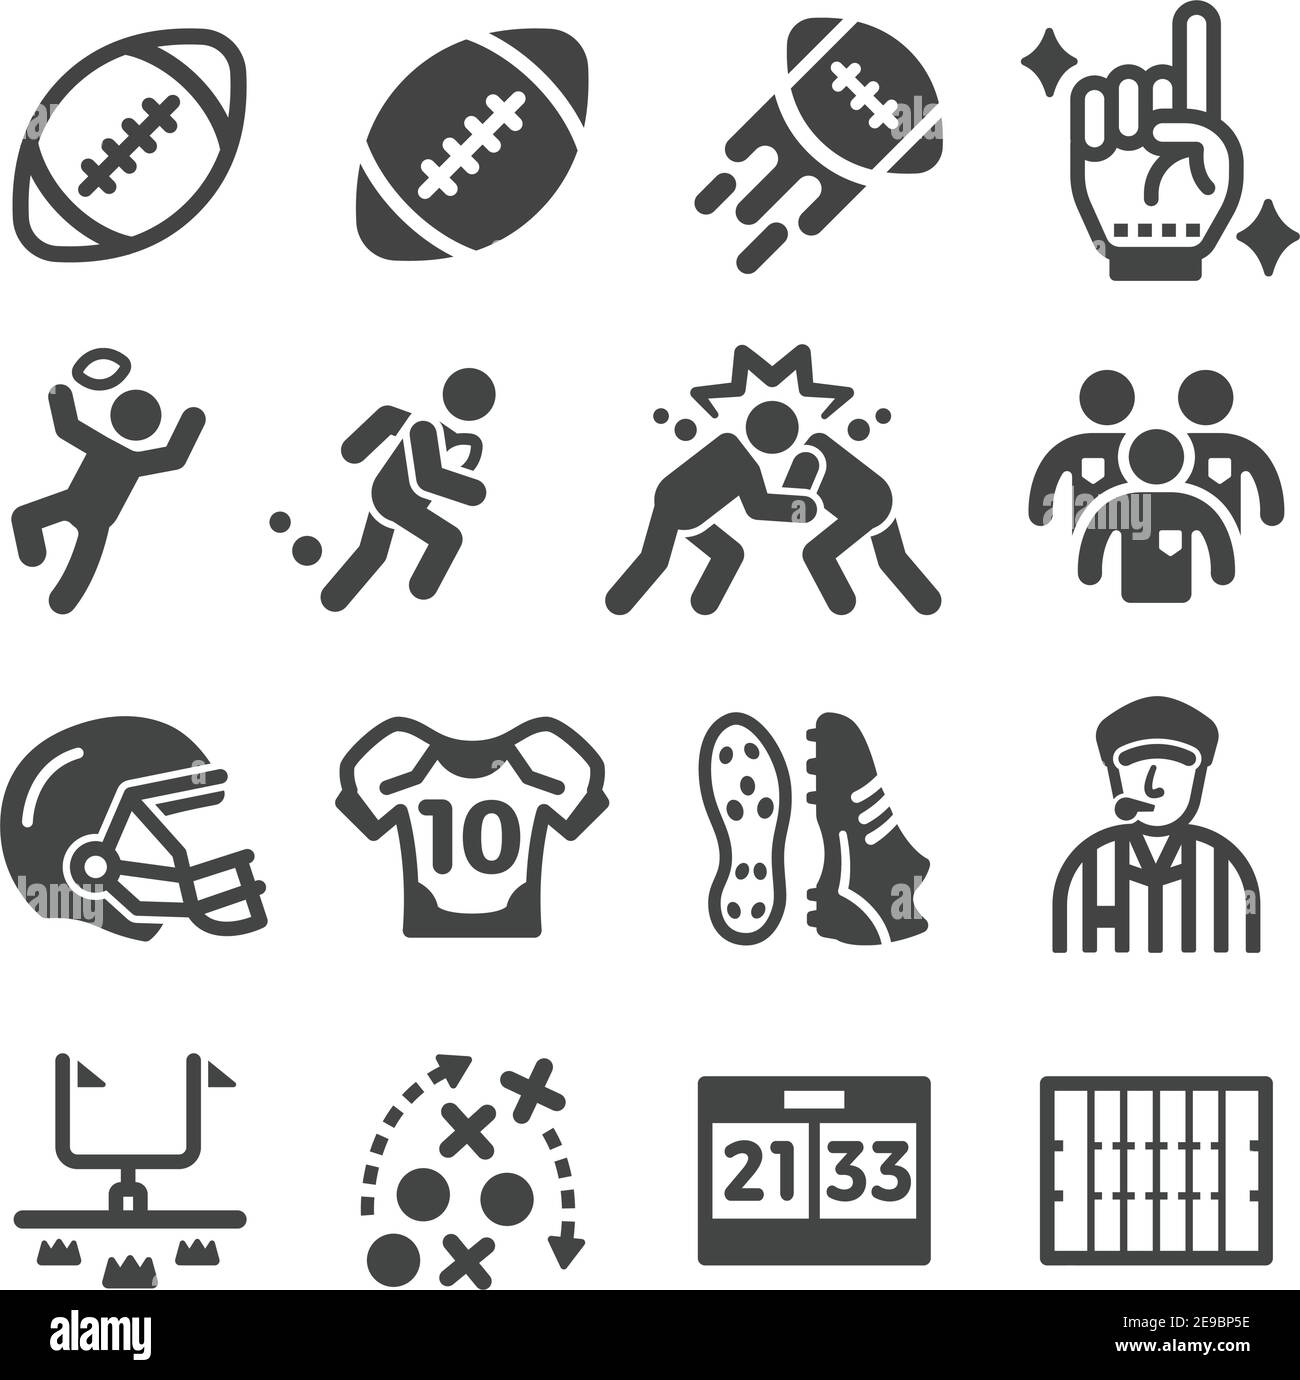 american football sport and recreation icon set,vector and illustration Stock Vector